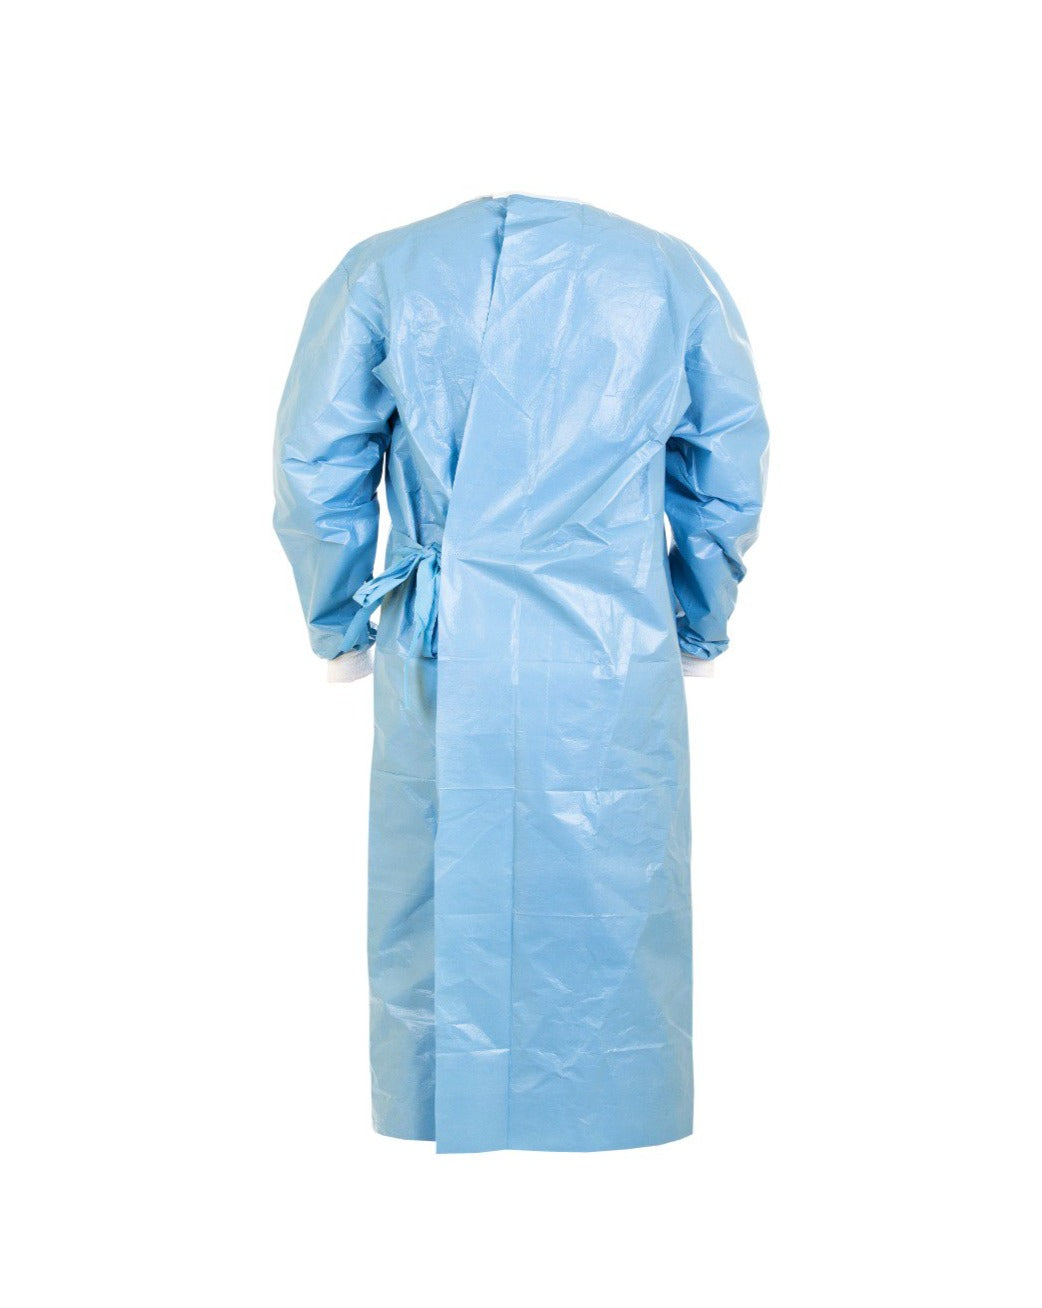 Sterile Laminated Surgical Gown